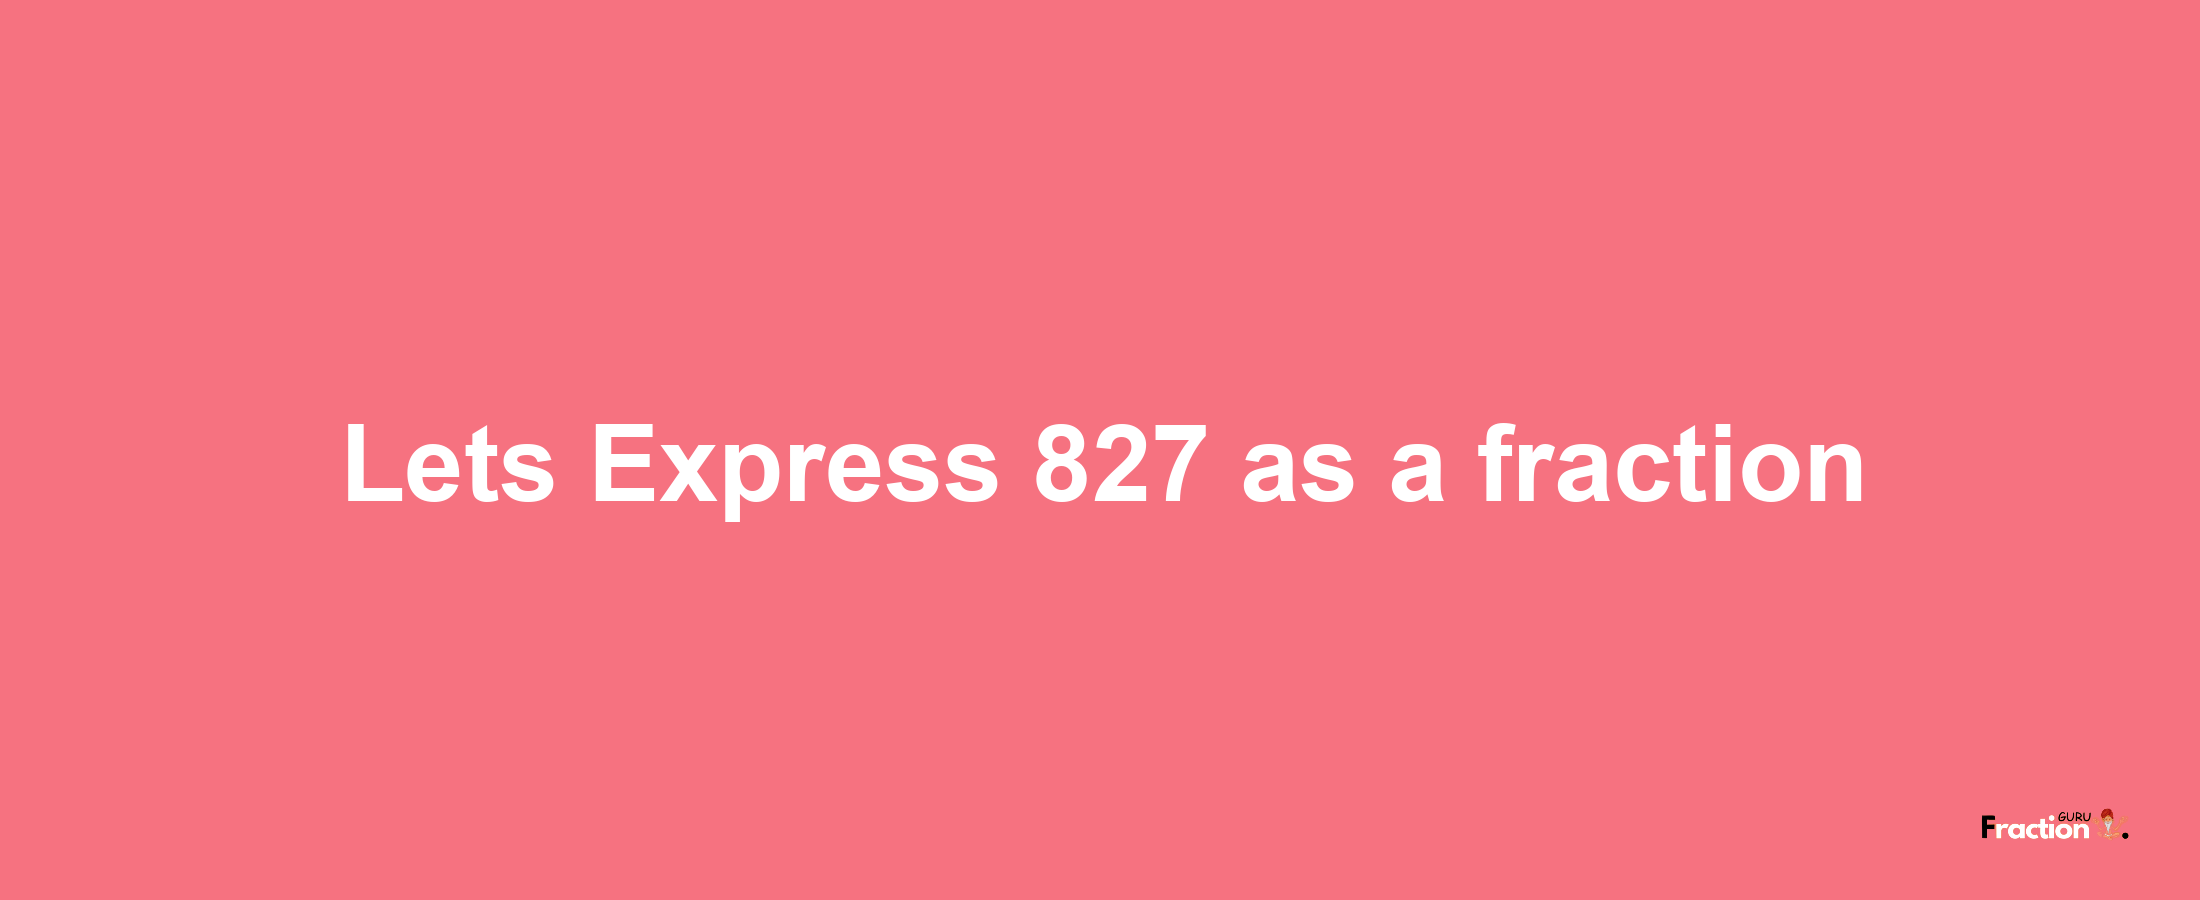 Lets Express 827 as afraction